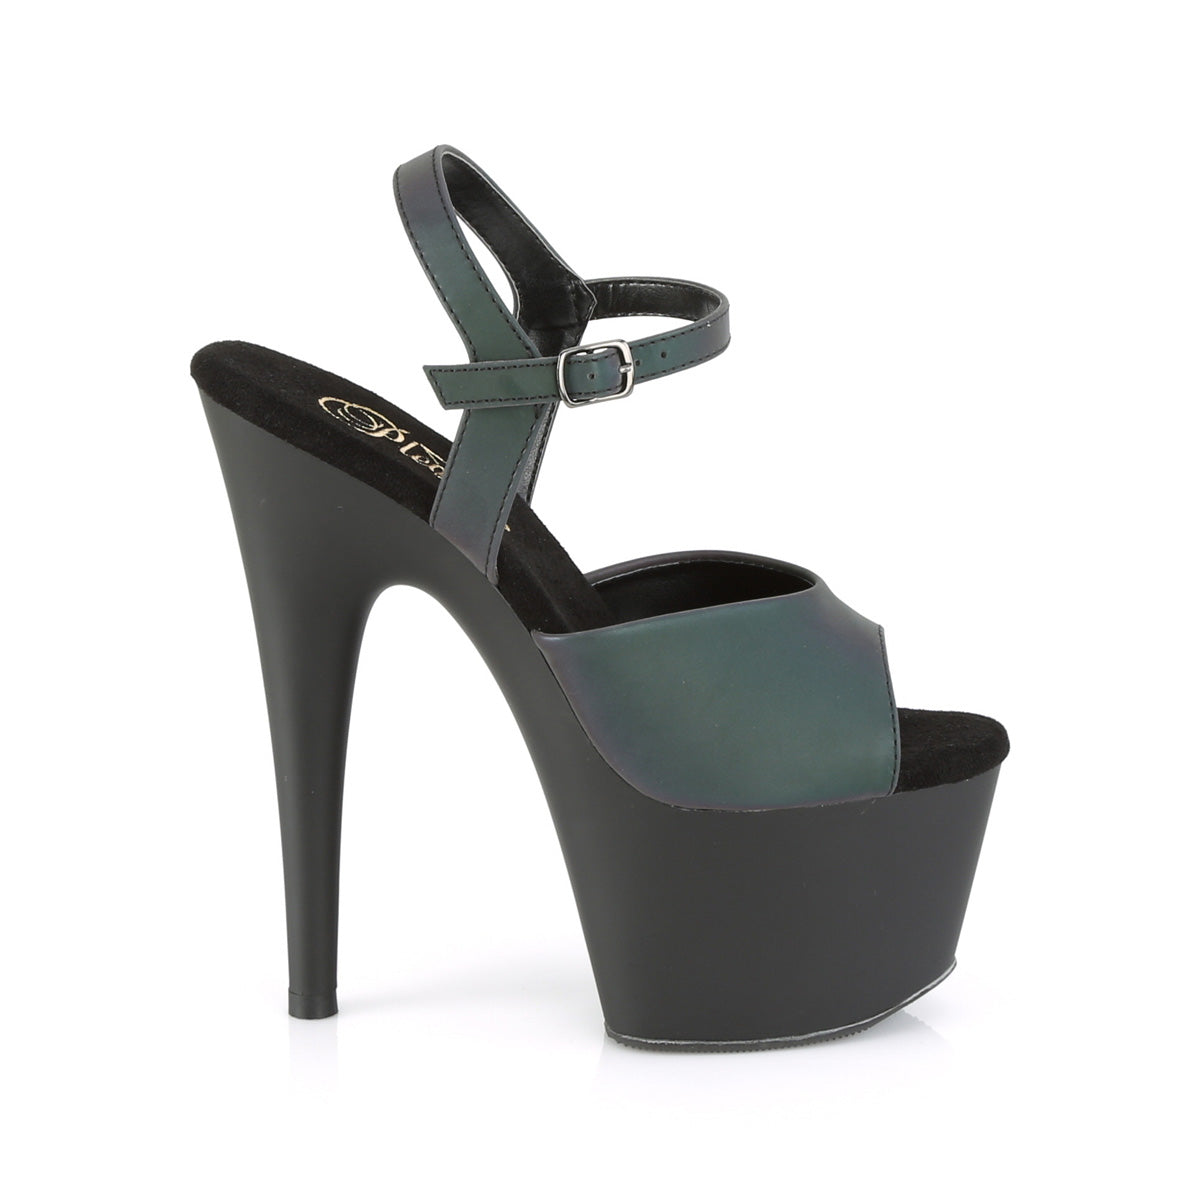 ADORE-709REFL 7 Inch Green Multi Reflective Pole Dancer Shoe-Pleaser- Sexy Shoes Fetish Heels